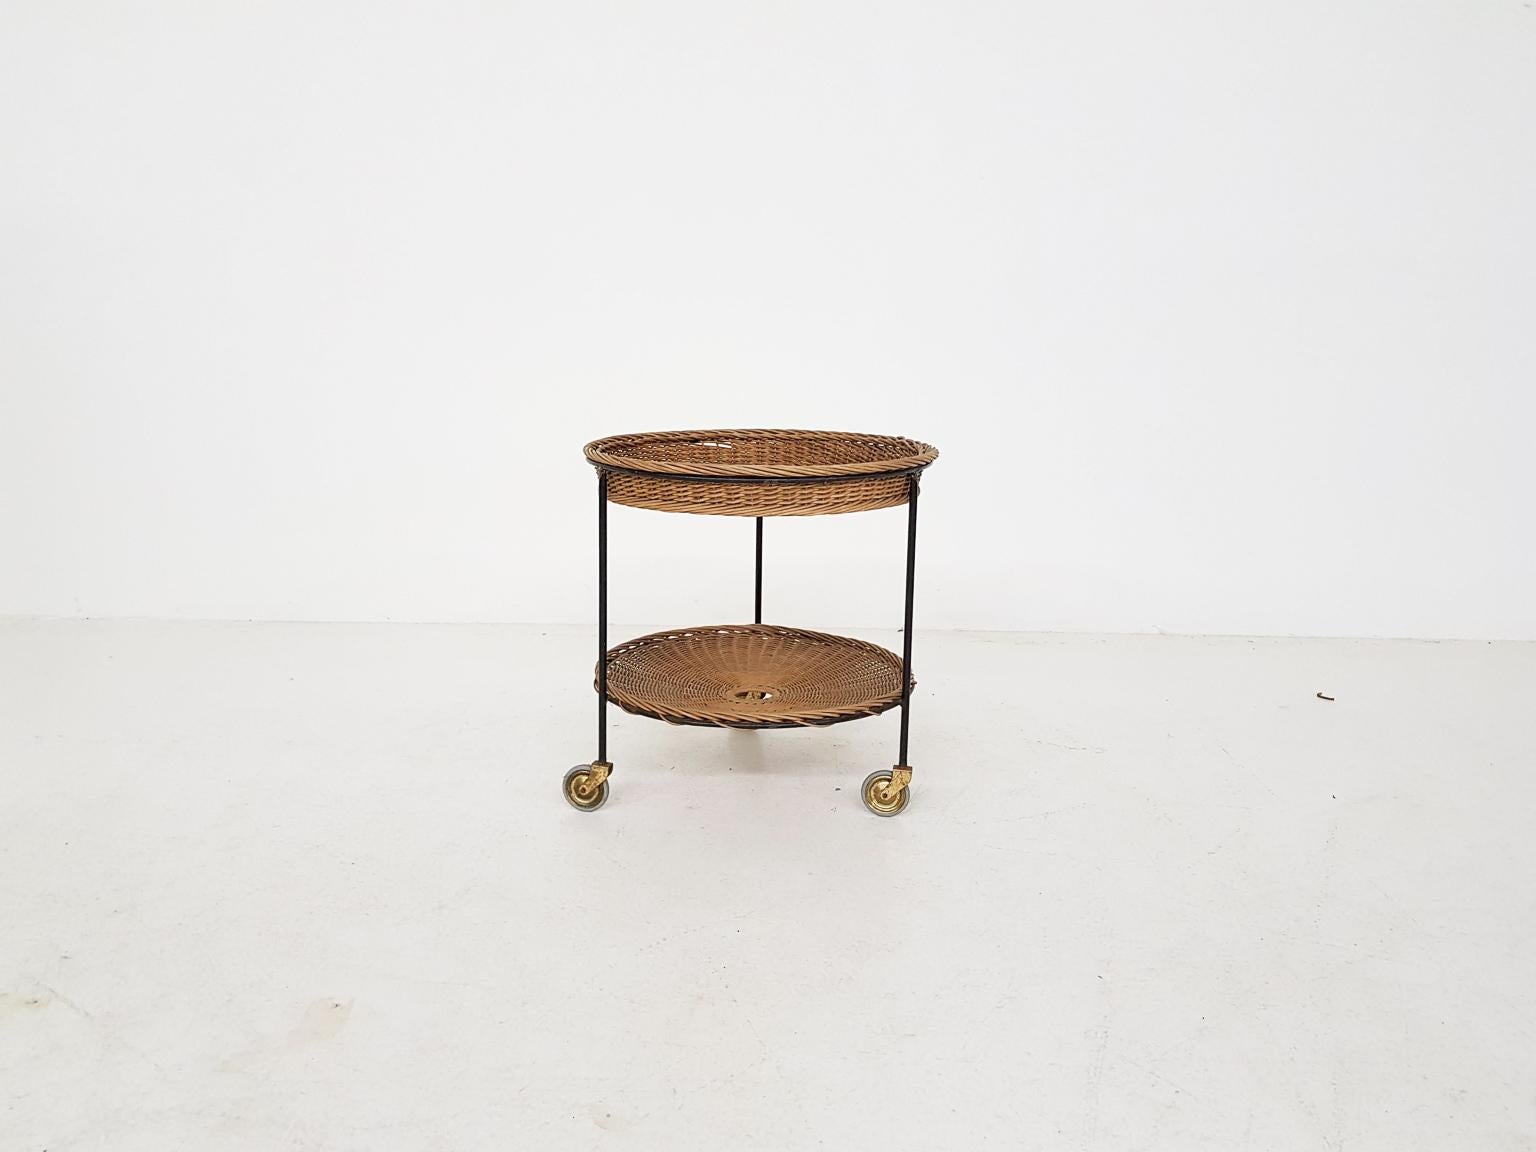 Nice matching set of 2 midcentury rattan and metal trolleys or bar carts. Probably made by Artimeta or Dirk Van Sliedrecht and Rohe Noordwolde. But they have also a lot resemblances to Mathieu Matégot. They are from the 1960s and probable made in